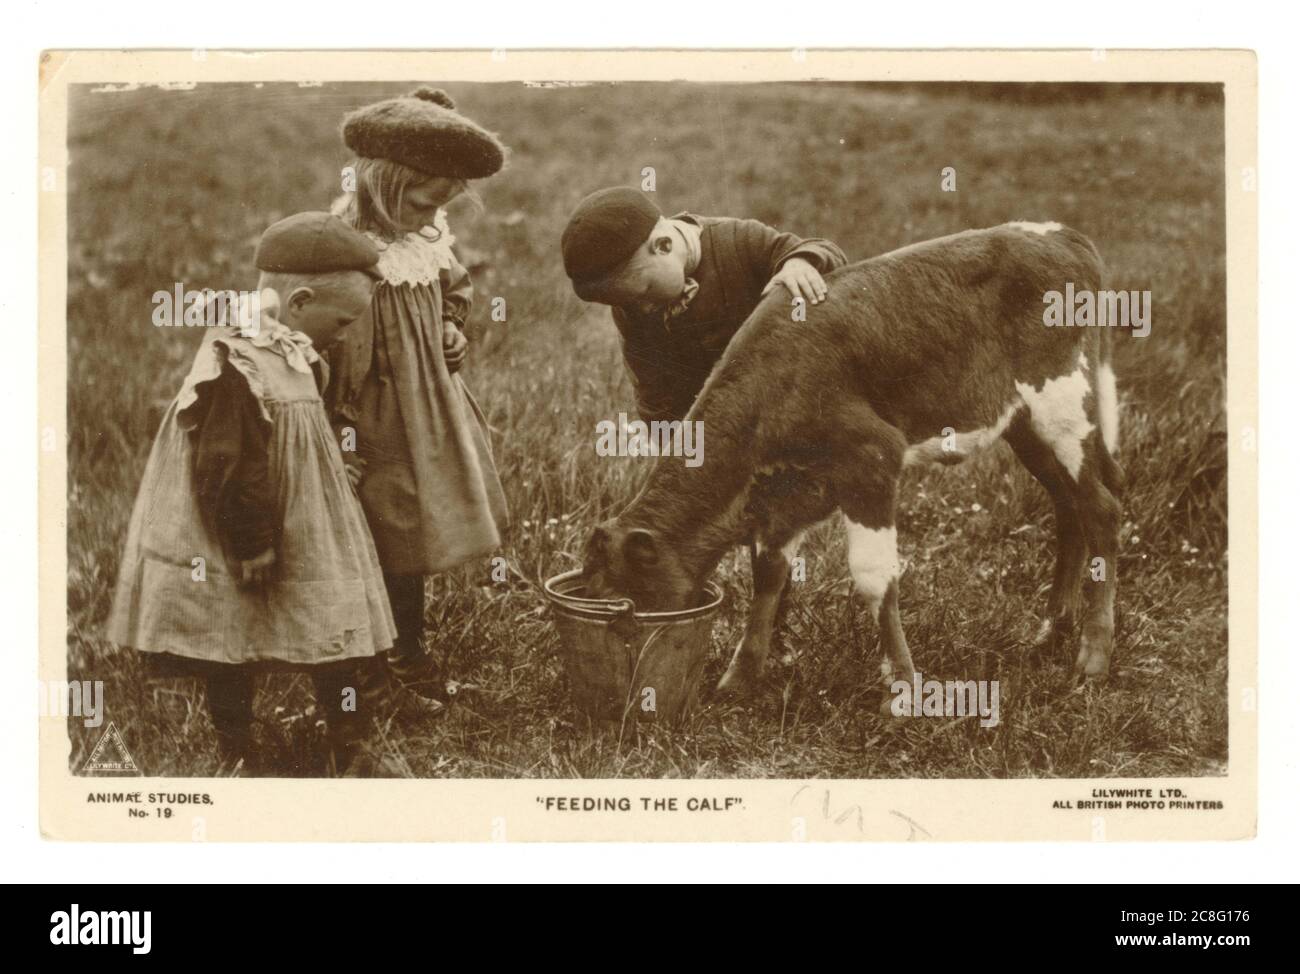 Early 1900's greetings postcard of an idyllic country scene depicting young children outdoors feeding a calf from a bucket. The young girl wears a Tam-o'-Shanter hat fashionable in the early 1920's and a smock dress. A young boy endures wearing a dress with a peaked cap, whilst his older brother wears more boyish clothes and a peaked cap,  posted 17 May 1921. Stock Photo